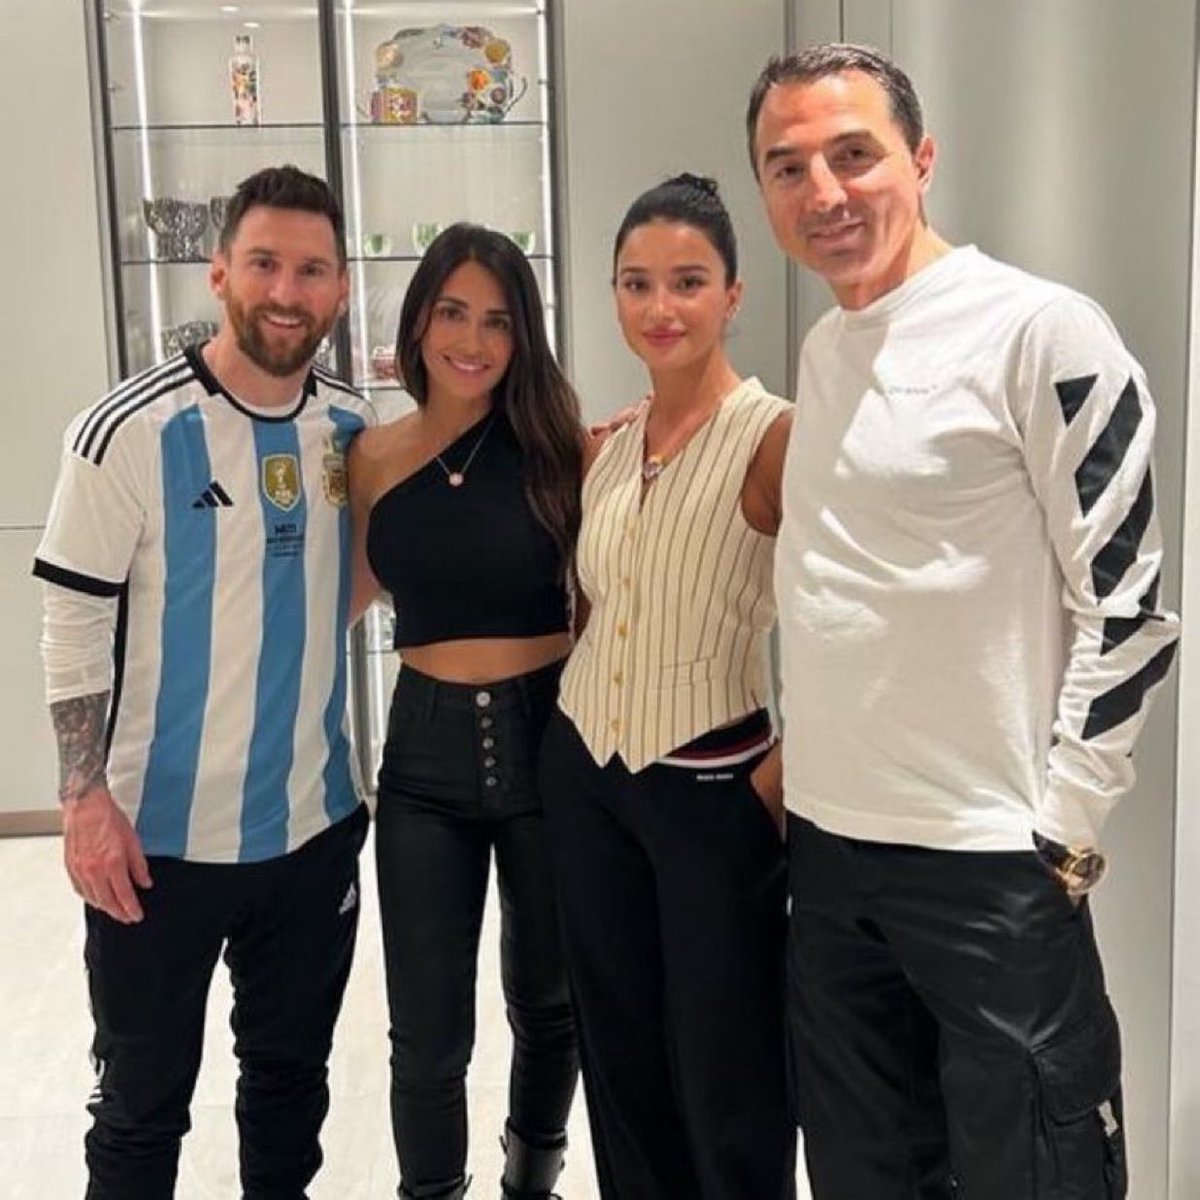 Antonella: “Leo, please dress nicely tonight as we have guests arriving.'

Messi: